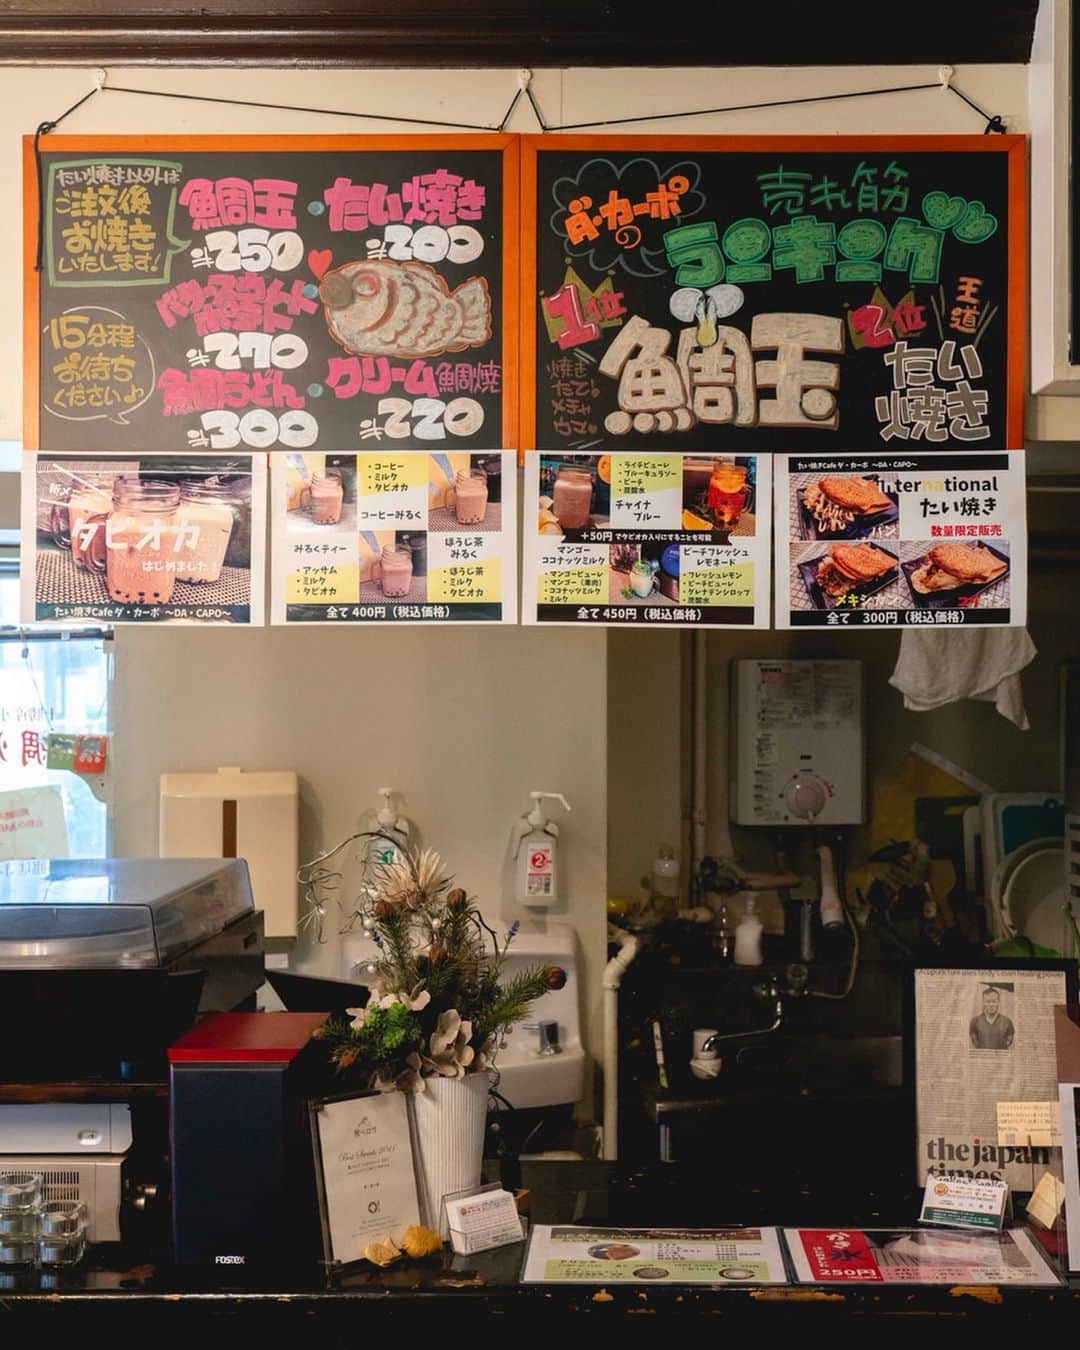 東急電鉄さんのインスタグラム写真 - (東急電鉄Instagram)「. café da Capo is a Taiyaki café known for it's easy-to-spot signboard, decorated with CD, LP records, imported magazines, and of course, taiyaki. This famous shop is just a 6 min walk from Gotanda Station.  Besides the standard azuki bean filling, you can pick from bacon, eggs, or even try the tai udon, a special item made in collaboration with famous Curry No Mise Udon shop in Gotanda. There’s a secret flavor waiting inside the tail-end, but you’ll have to try it to find out.  There's plenty to enjoy besides Taiyaki, like bubble tea, a drink that's perfect for the hot season. This spot has received a lot of media buzz in the past and is definitely worth the visit. (Tokyu Ikegami Line, Gotanda Station.) . 五反田駅から徒歩6分のところにある有名店「たい焼きcafeダ・カーポ」 メニューは小豆に加え、ベーコンと卵が入った鯛玉、五反田のカレー屋さん「カレーのうどん」とコラボして作ったという鯛うどんなどユニークです。しっぽに隠し味が用意してあります。それが何かは食べてみてのお楽しみ。その他、タピオカや暑い季節にぴったりのドリンクもあり、たい焼き以外も楽しむことができます。メディアの取材も多い有名店のお味をぜひ一度お楽しみください。 （東急池上線　五反田駅） . #ダカーポ #たい焼き #鯛焼き #taiyaki #japan🇯🇵 #nippon #tokyo #gotanda #五反田 #東京 #日本 #food #cafe #japanesecuisine #japanesefood #redbean #japanfocus #japantravel #japantrip #instagramjapan #japanesestyle #japaneseculture #japanstyle #lovejapan #instajapan #visitjapanjp #visitjapan #explore #instatravel」9月7日 19時07分 - tokyu_railways